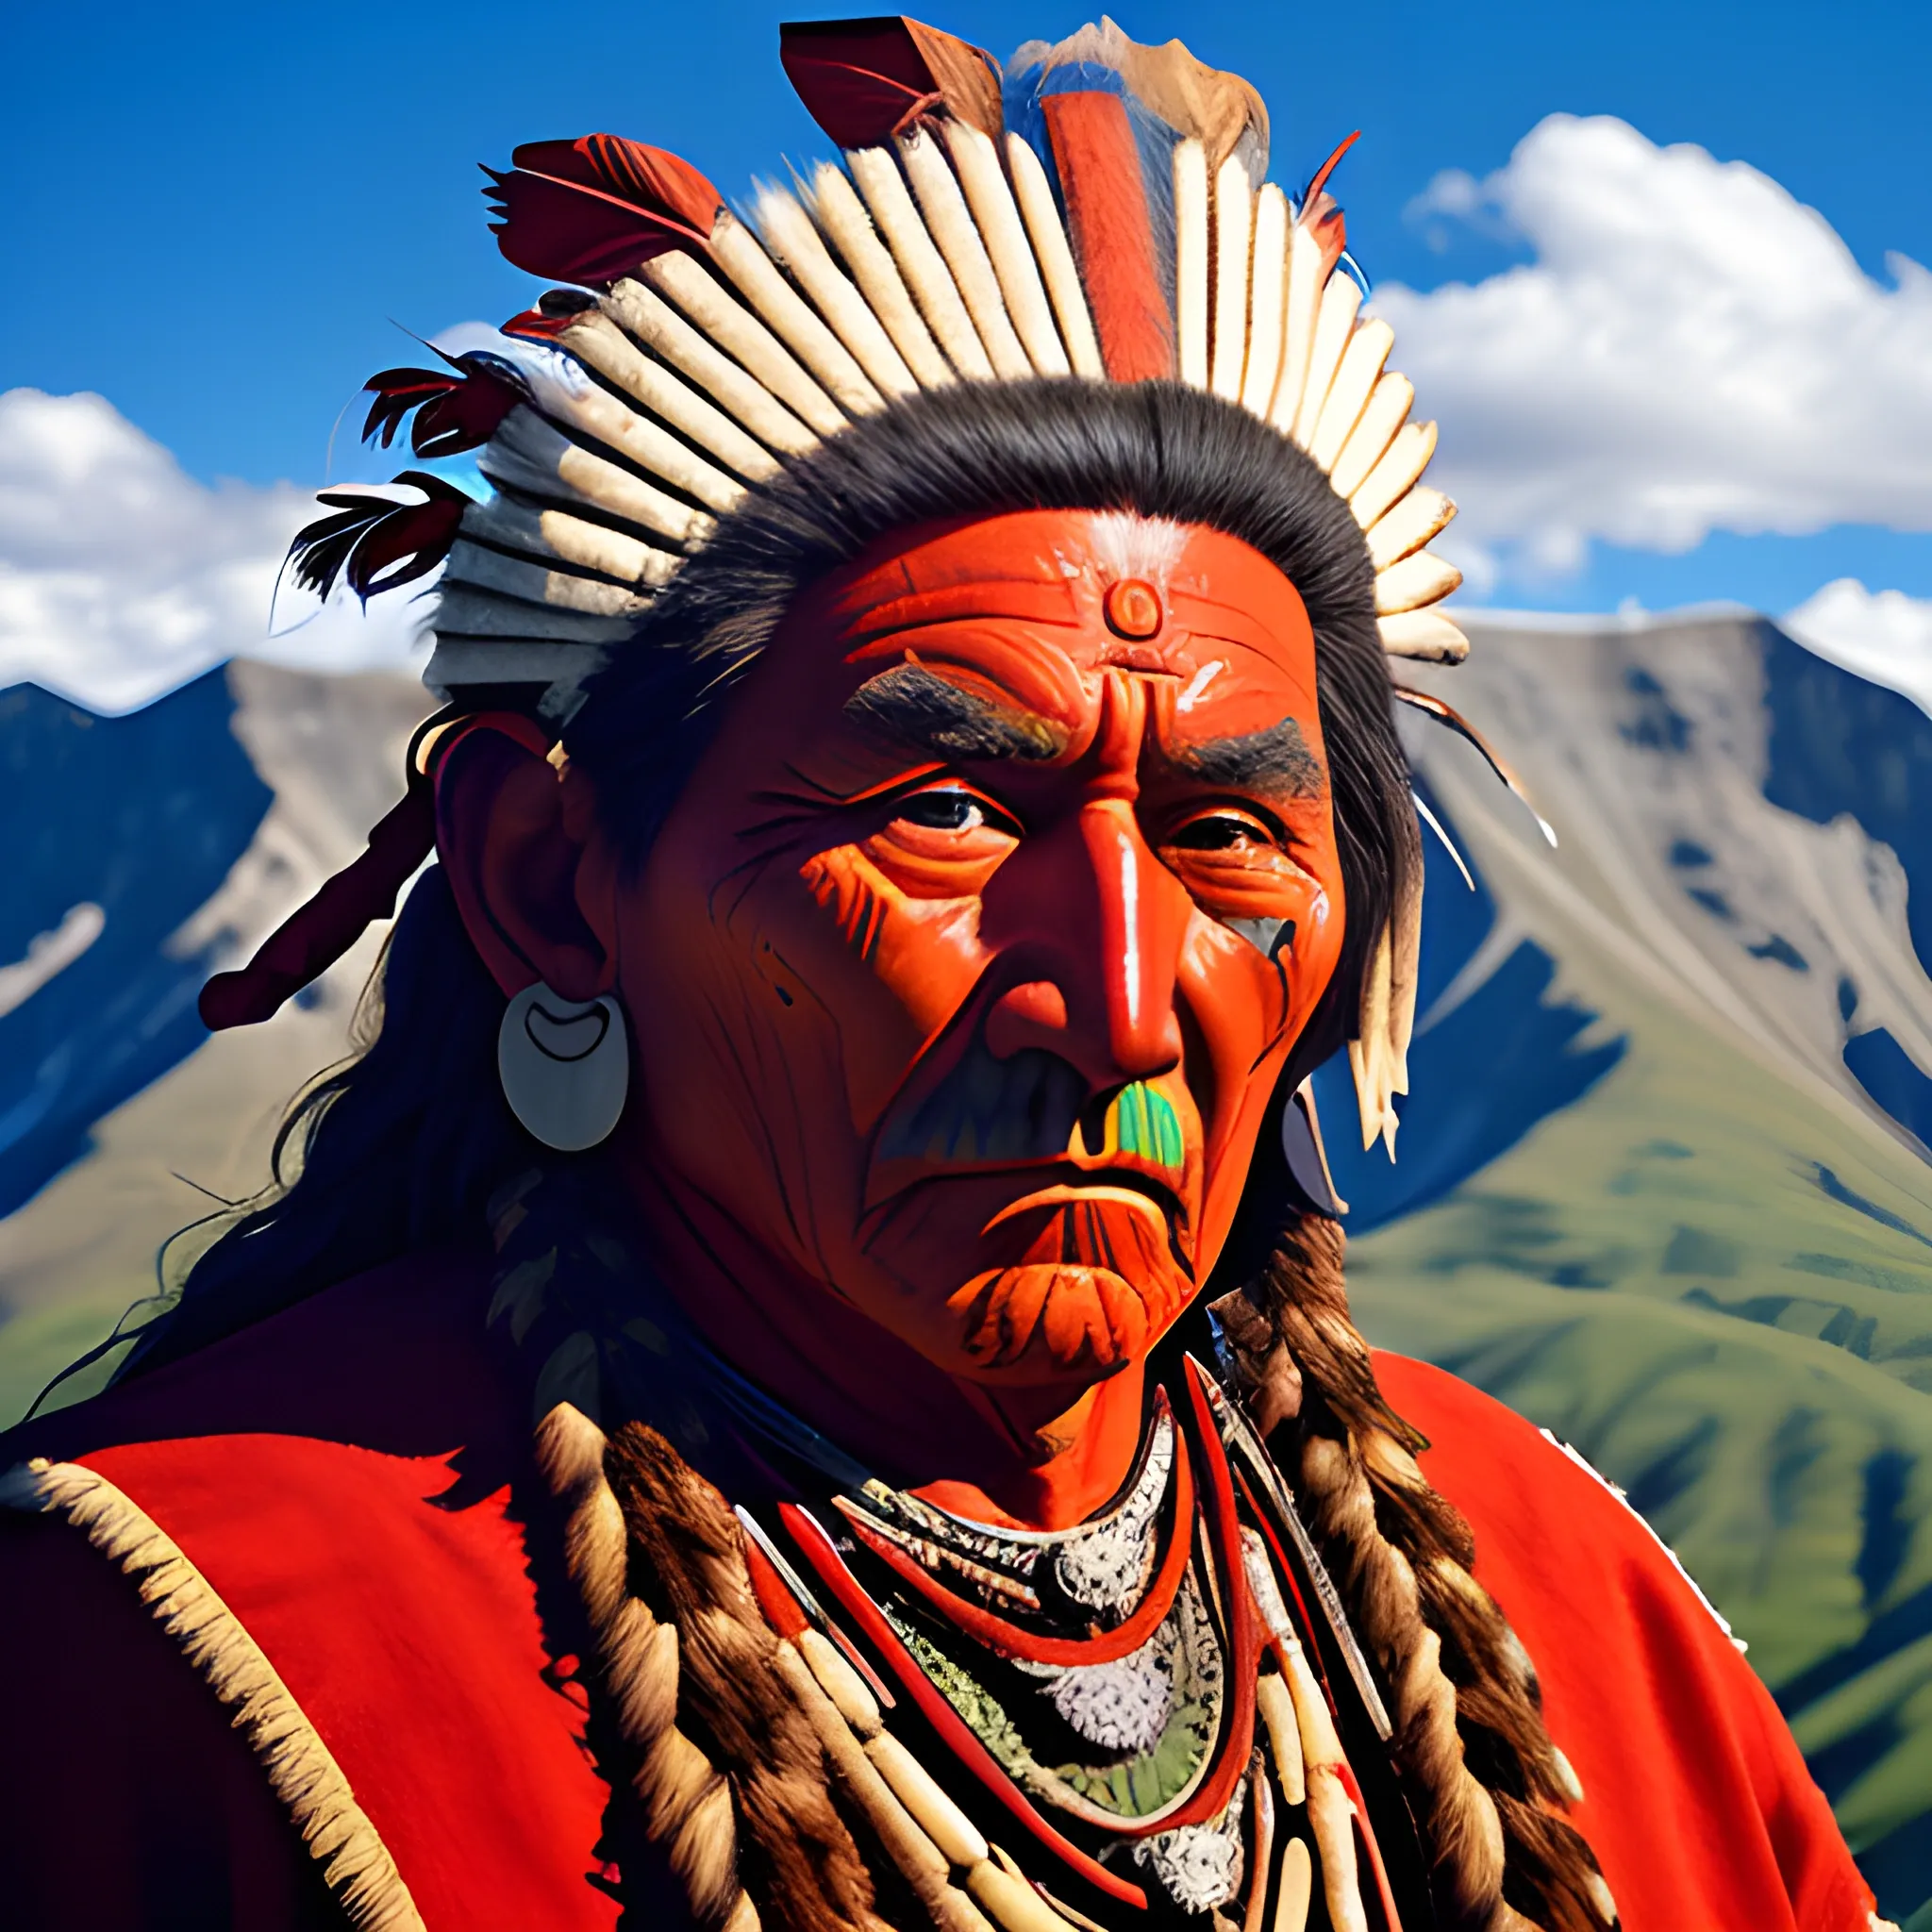 face of chief redskin man. mountin landscape,
athmospher, cloucs, Trippy